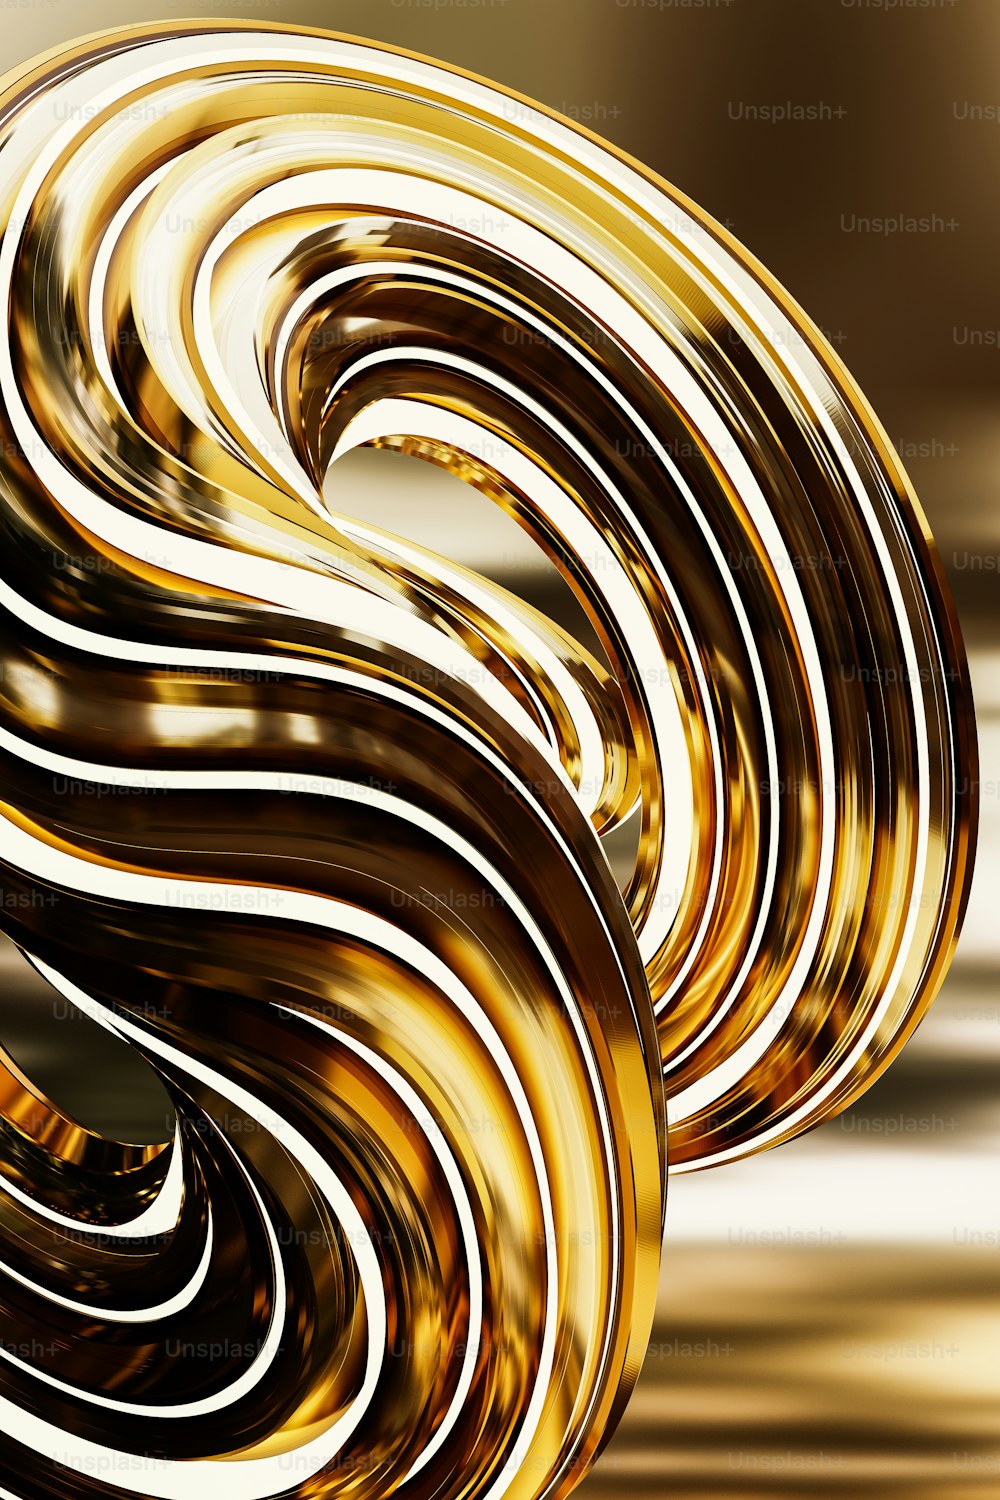 an abstract golden background with a spiral design